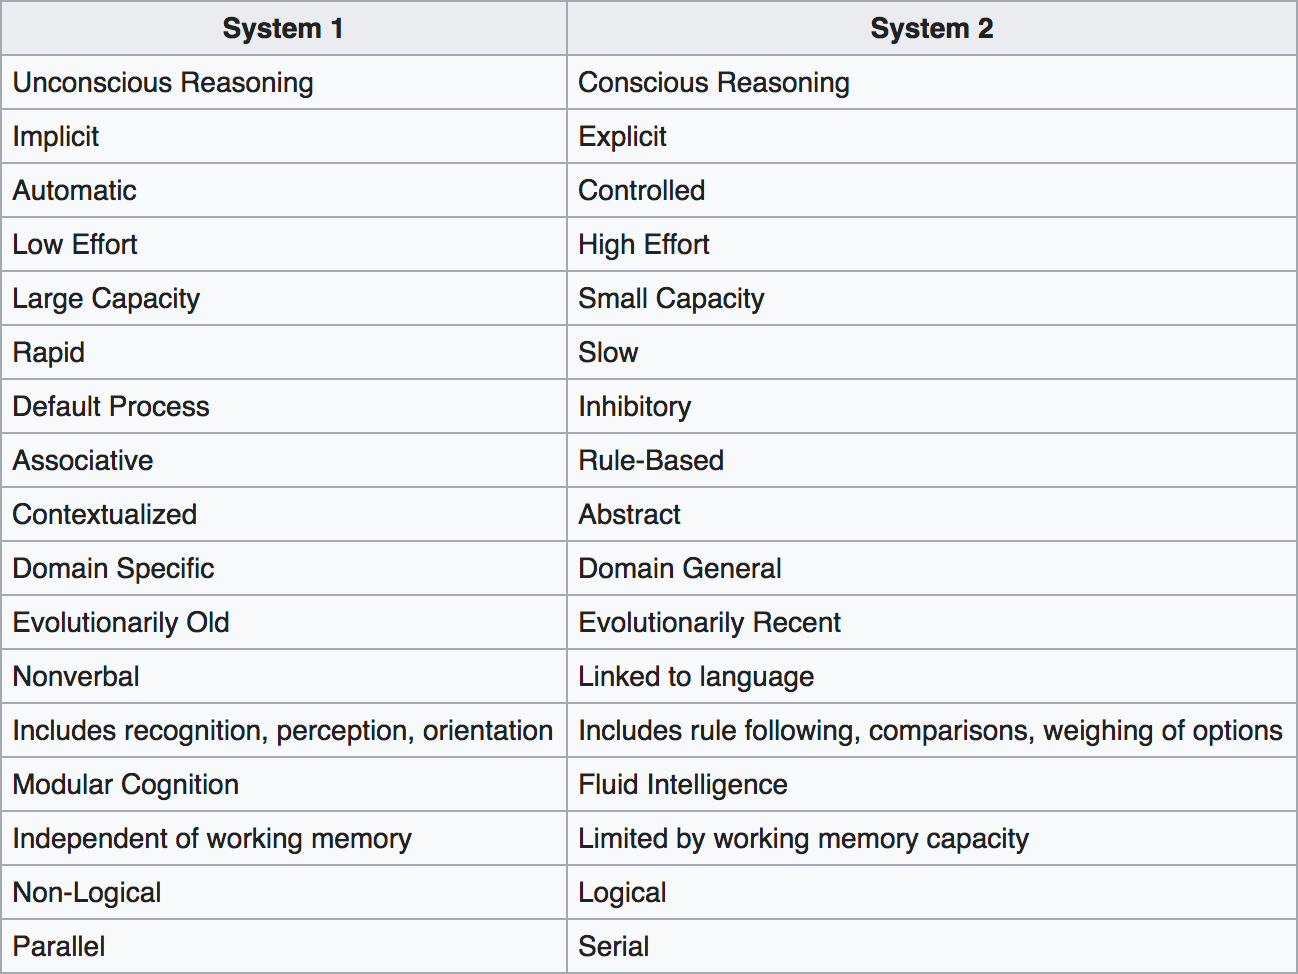 System one vs. system two characteristics